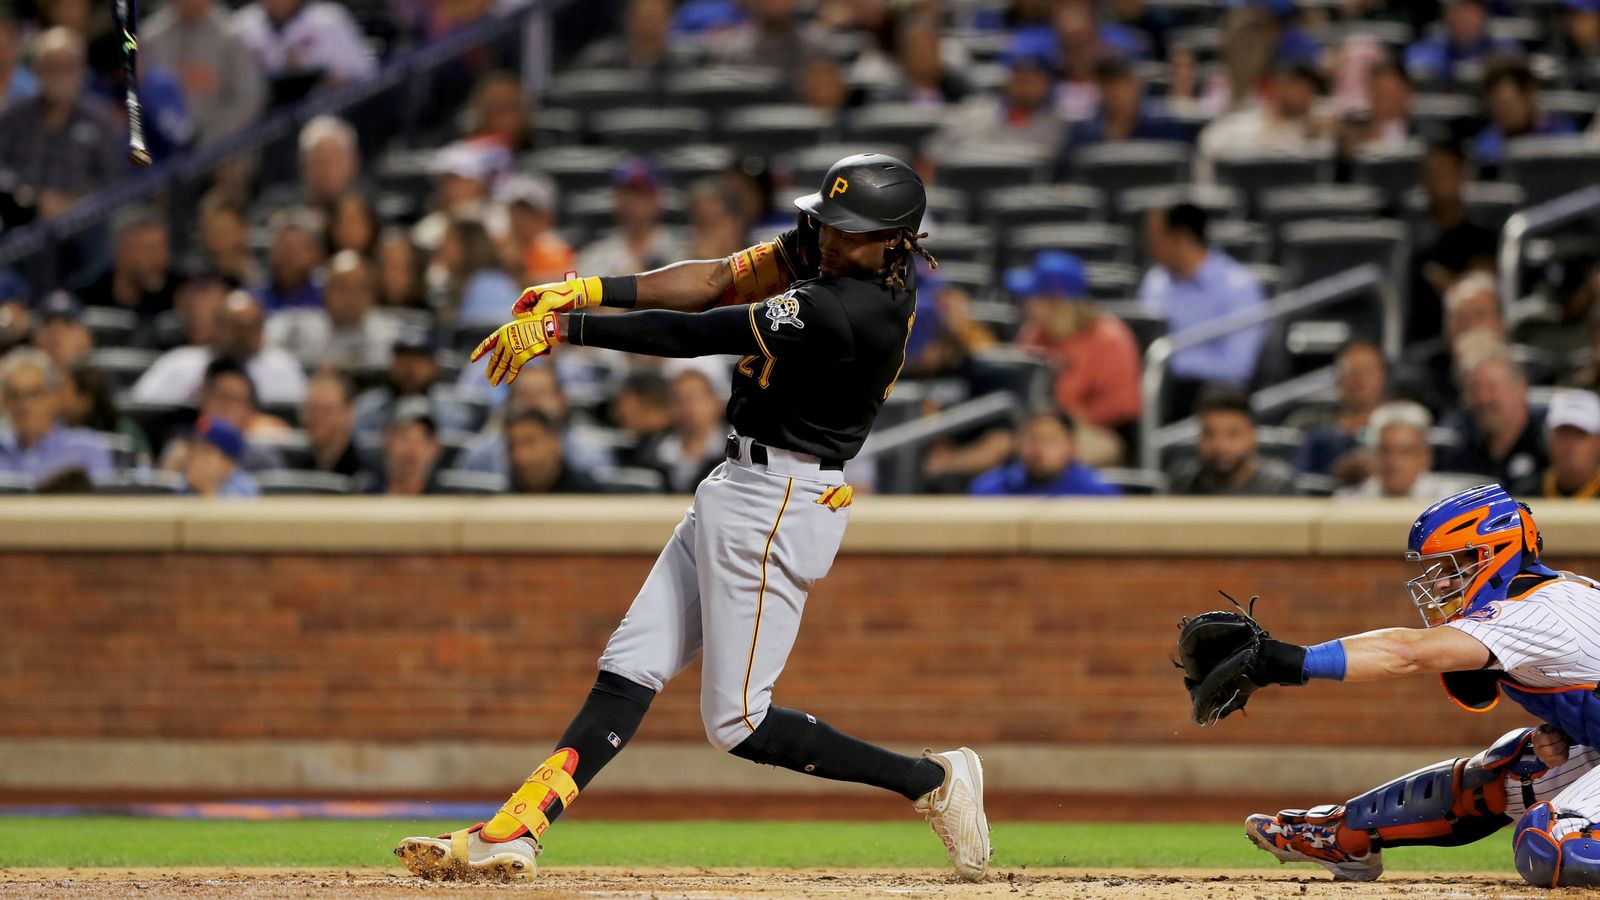 Oneil Cruz homers, but Pirates fall short against Mets